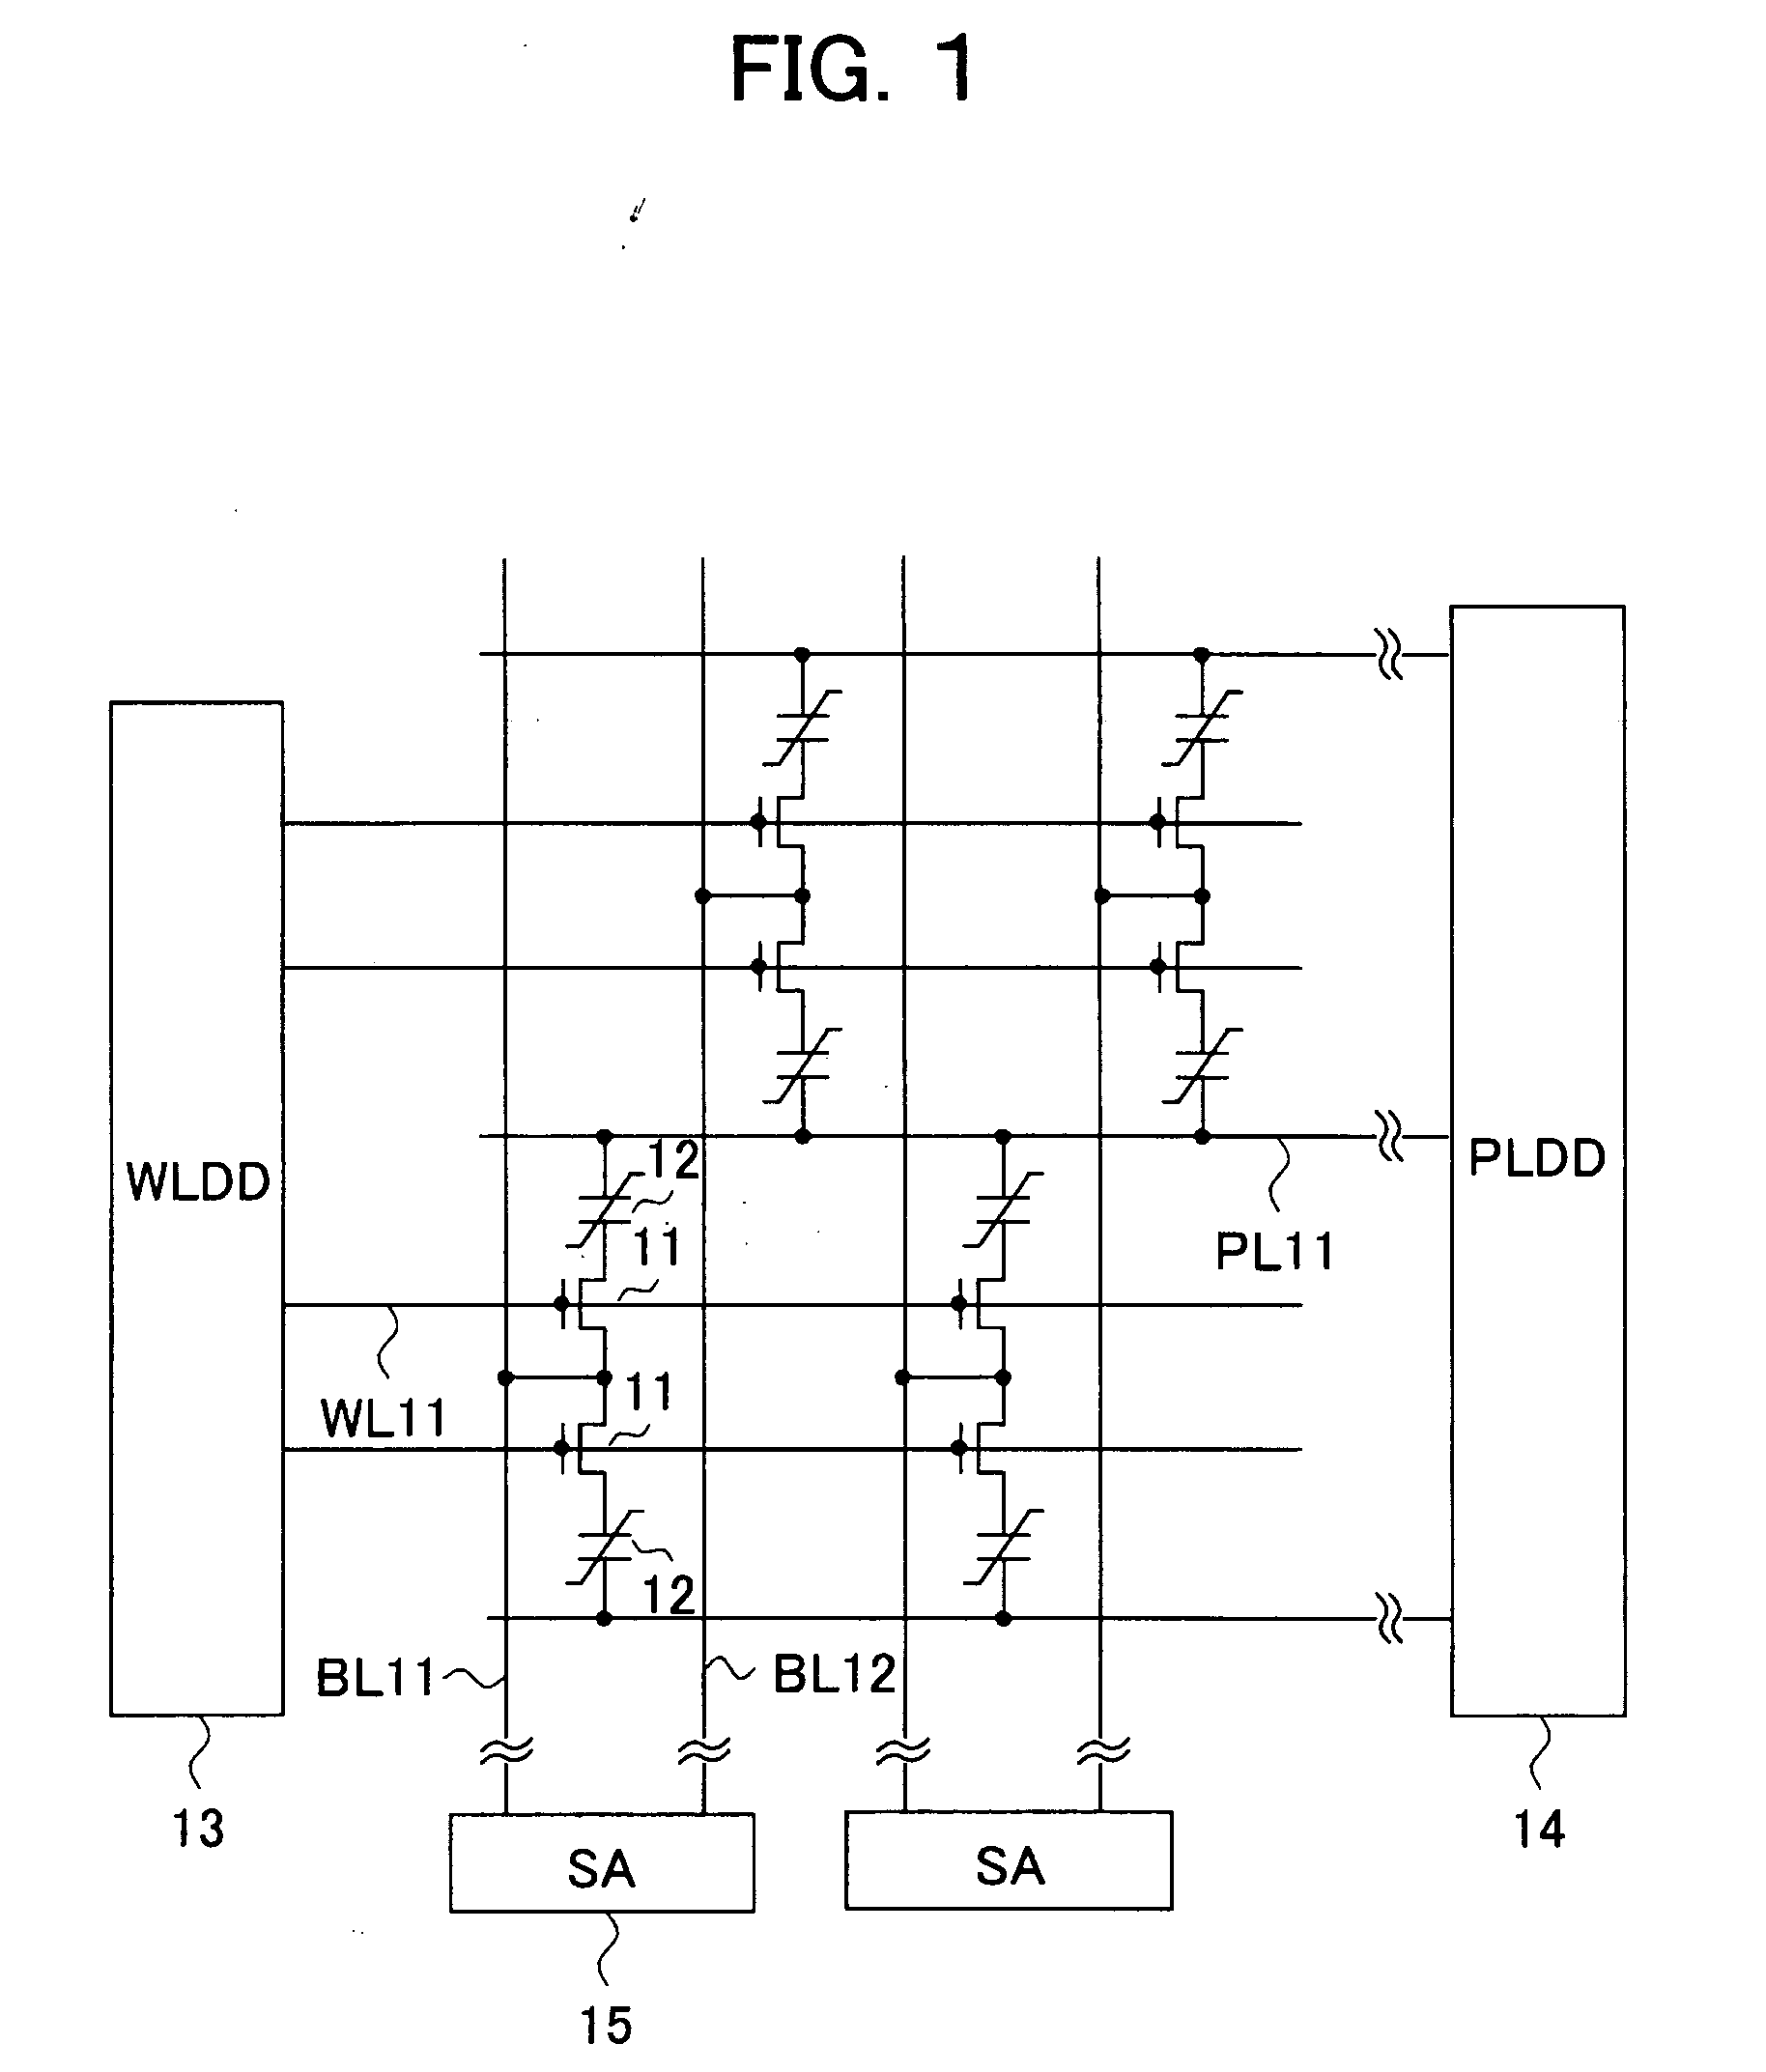 Storage device, file storage device, and computer system